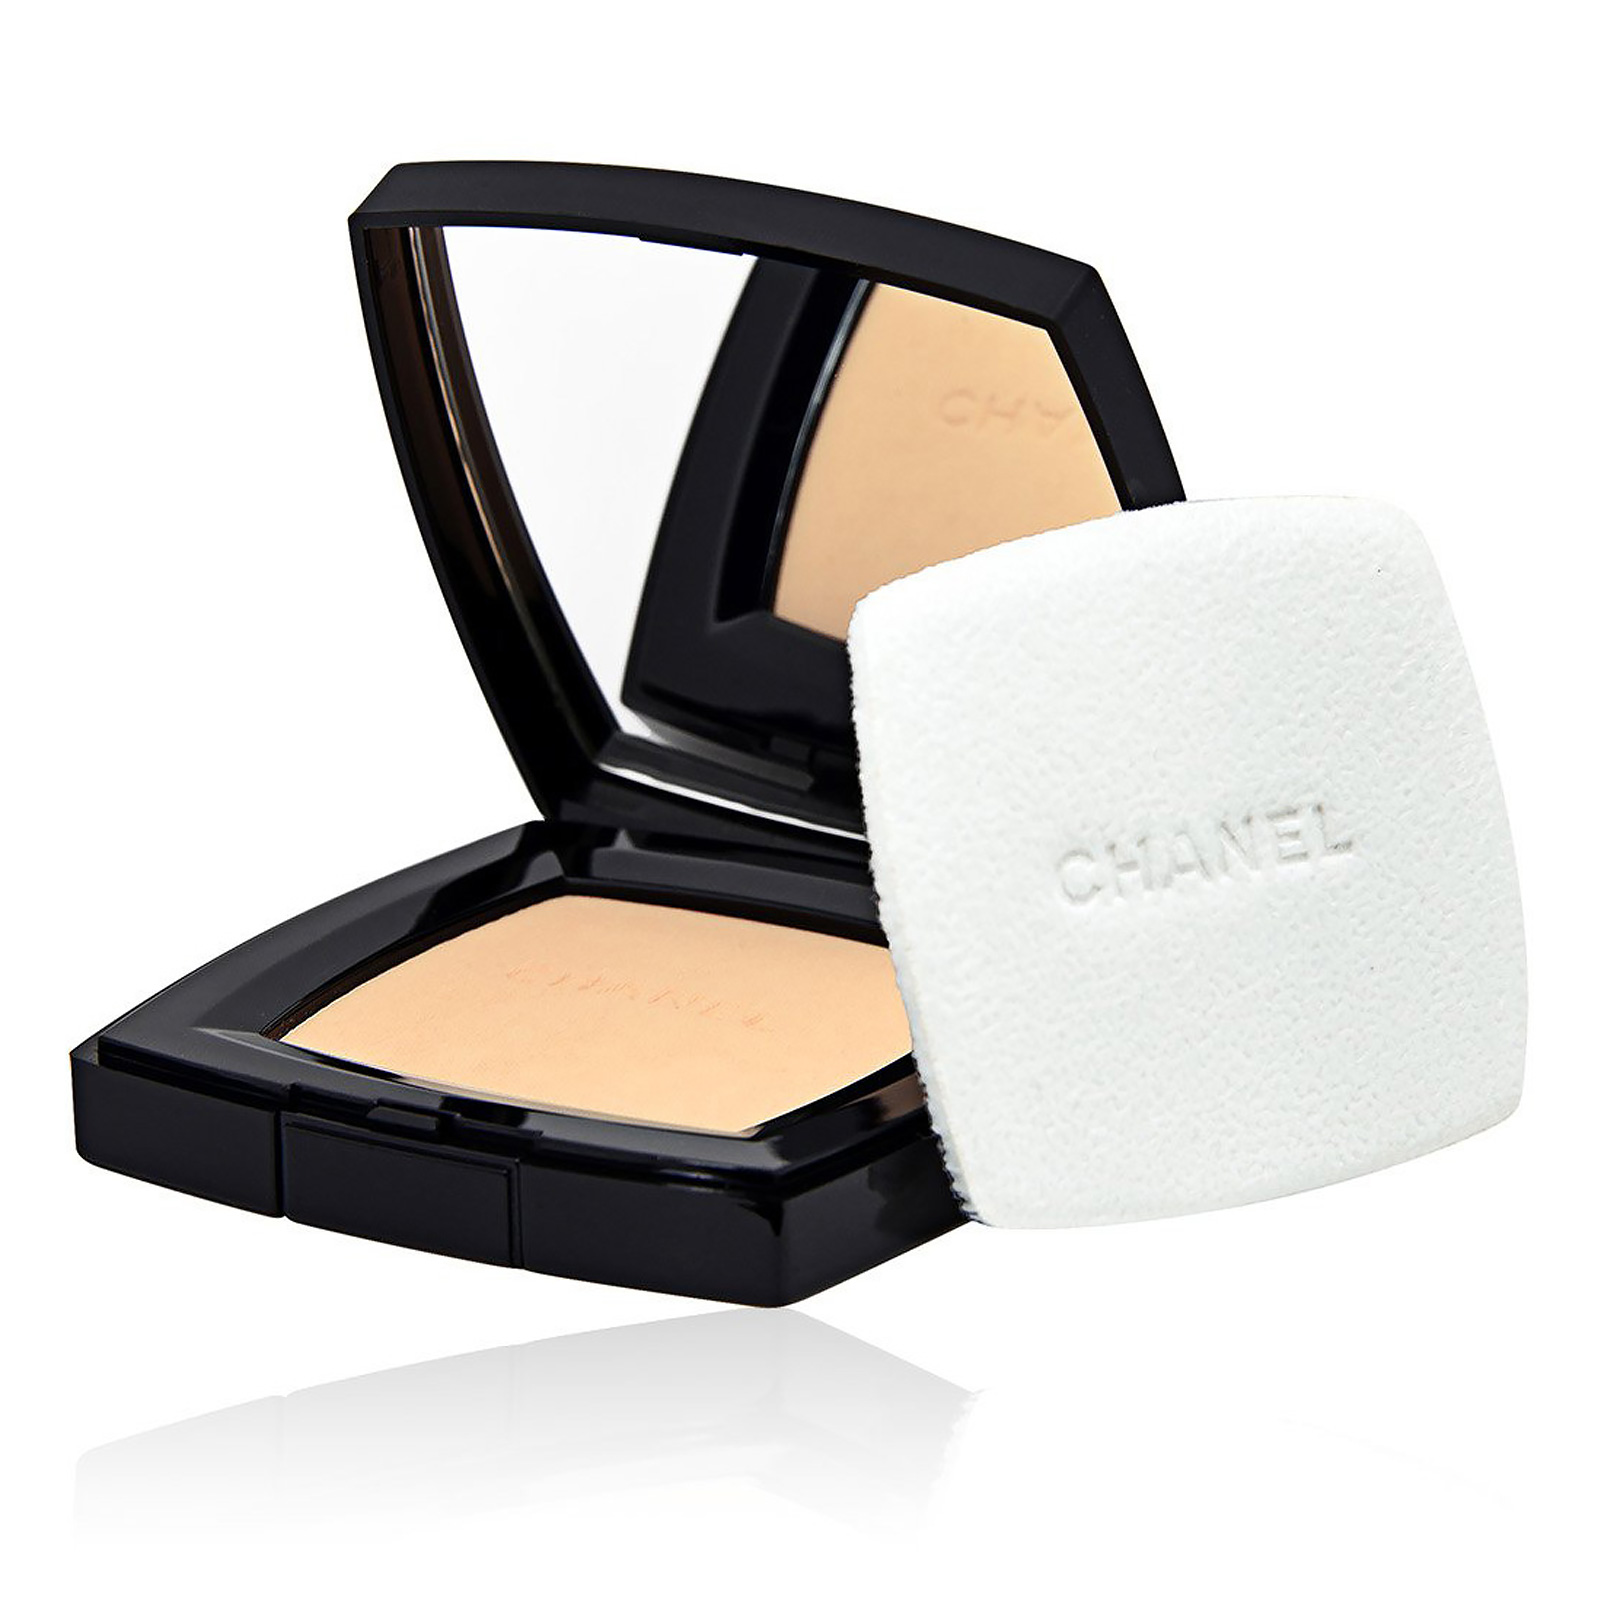 Chanel Poudre Universelle Compacte Natural Finish Pressed Powder15 g 0.53 oz  AKB Beauty